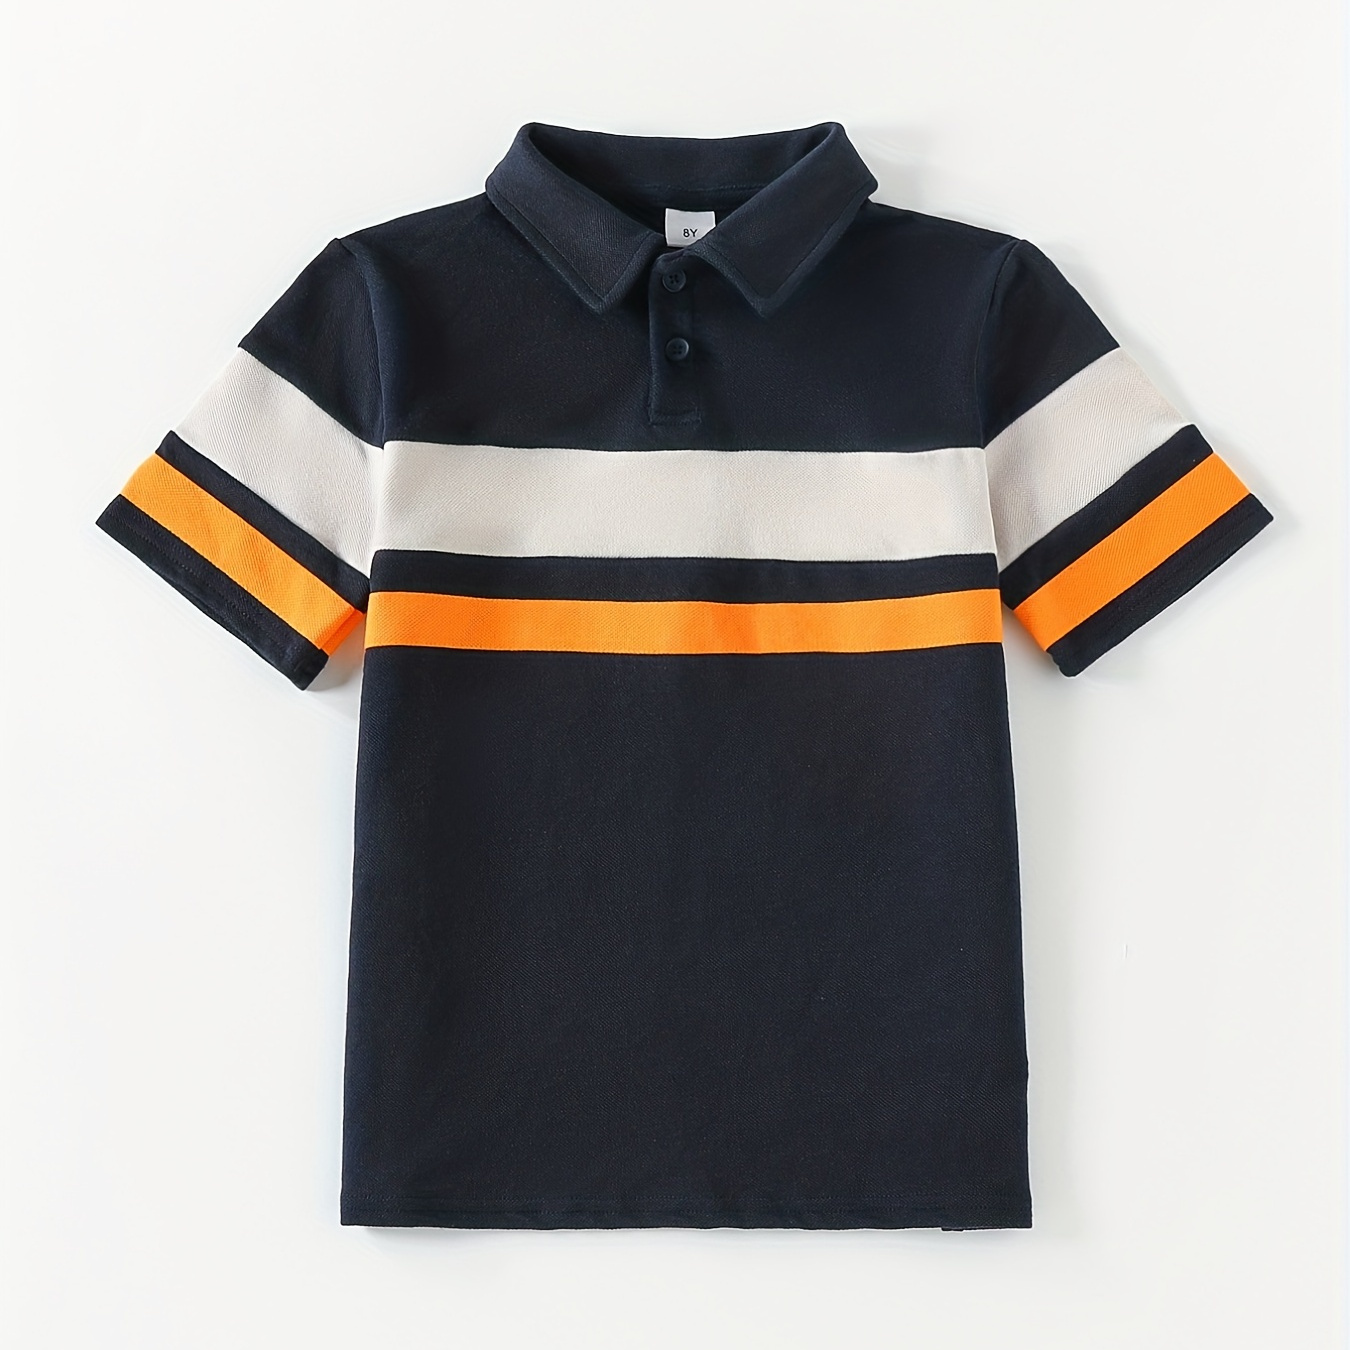 

Boys Color Block Striped Creative Shirt, Casual Lightweight Comfy Short Sleeve Lapel Tee Tops, Kids Clothings For Summer